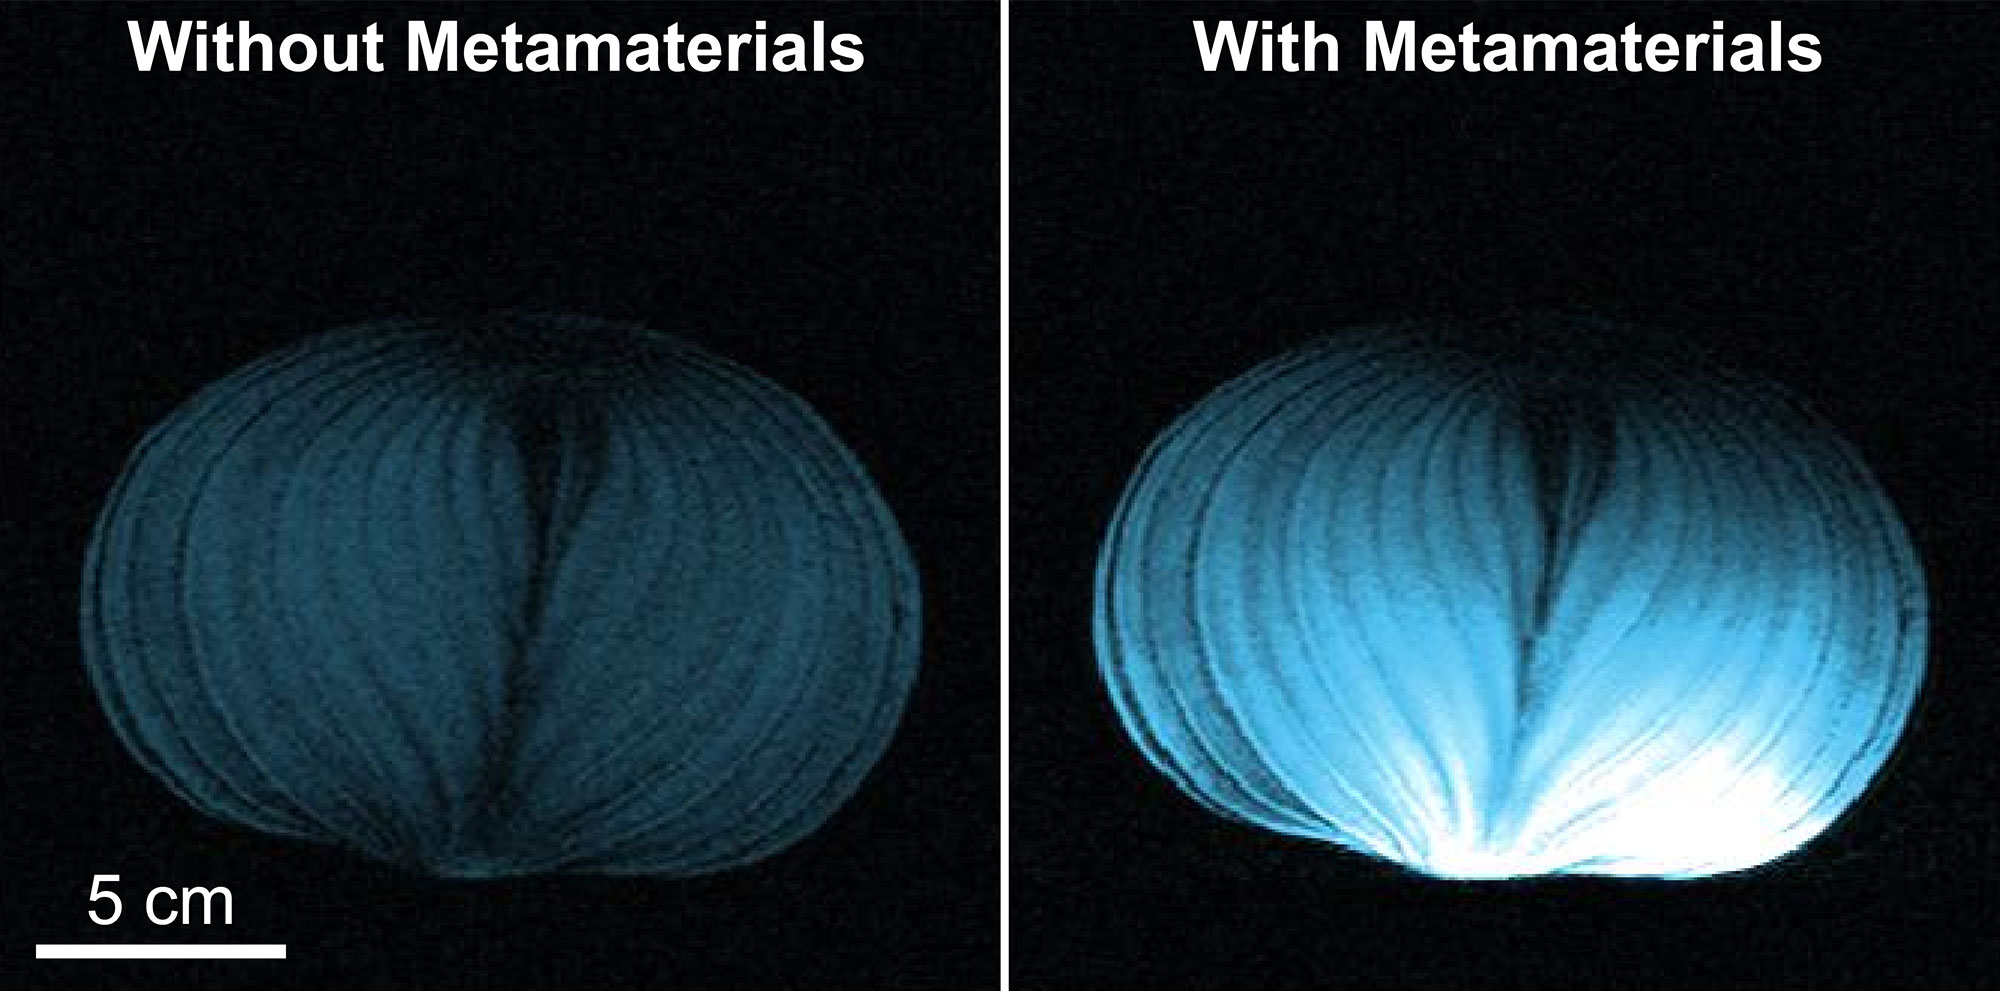 Composite image showing MRI scans of an onion, comparing a standard MRI scan quality to quality of an MRI scan using the newly developed intelligent metamaterial. Text embedded of the standard MRI scan says 'Without Metamaterials' and text above the enhanced MRI scan says 'With Metamaterials.' 